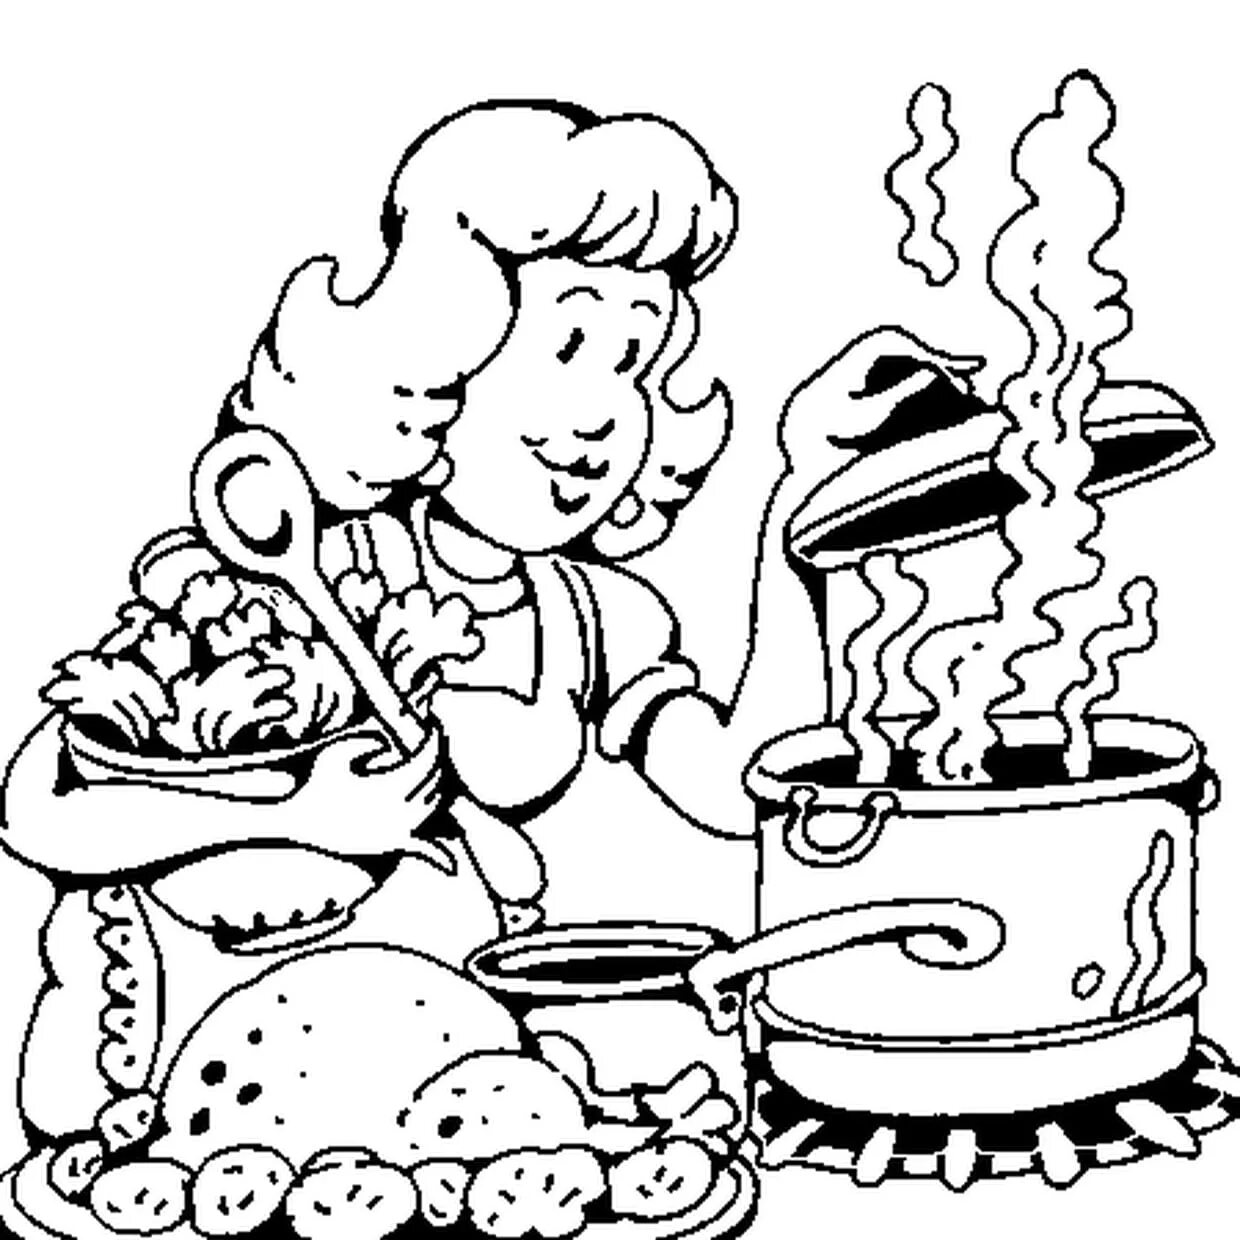 Colorful bright coloring page of pastry chef profession